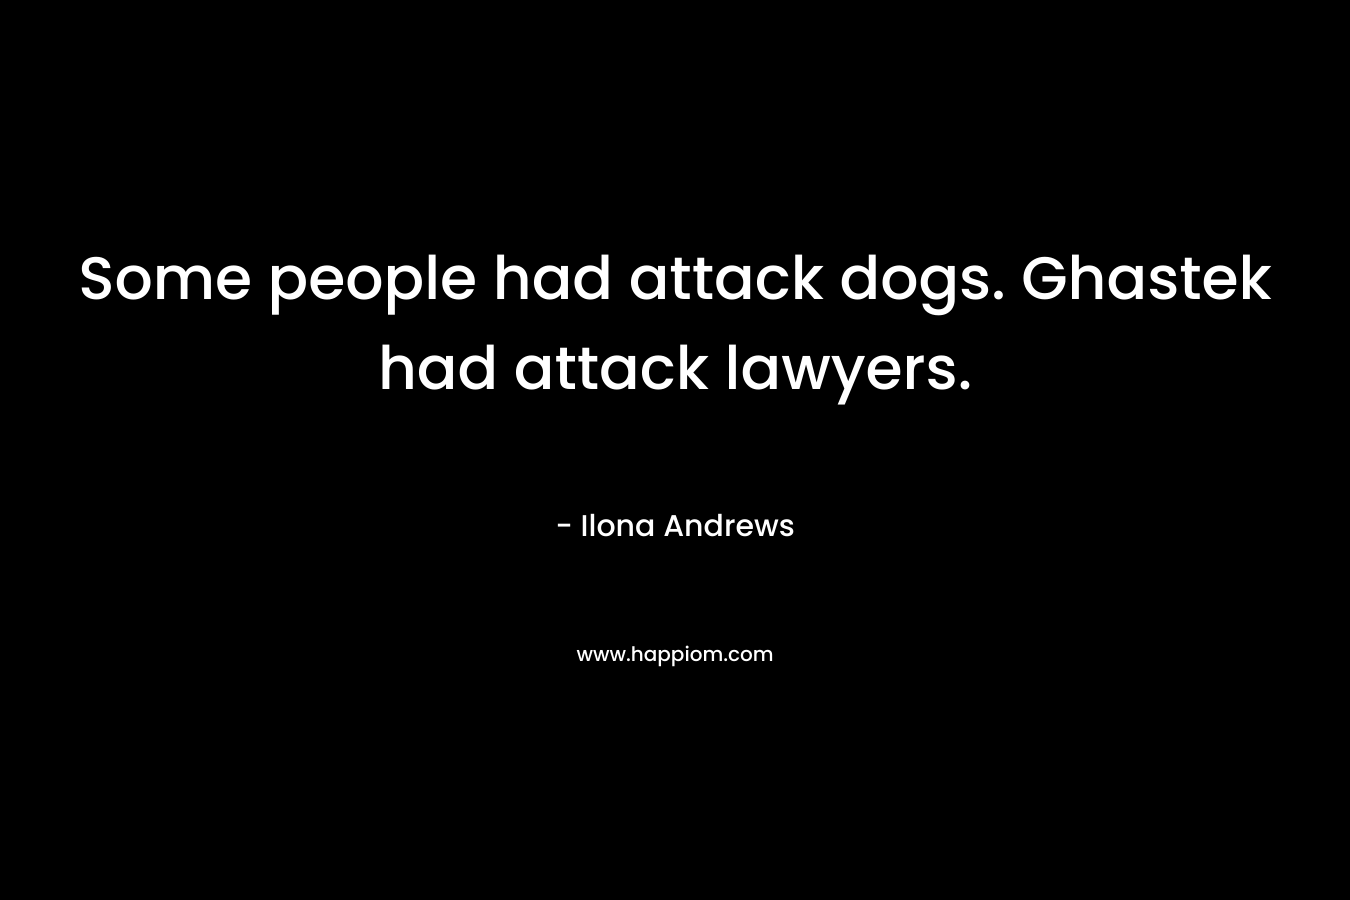 Some people had attack dogs. Ghastek had attack lawyers.